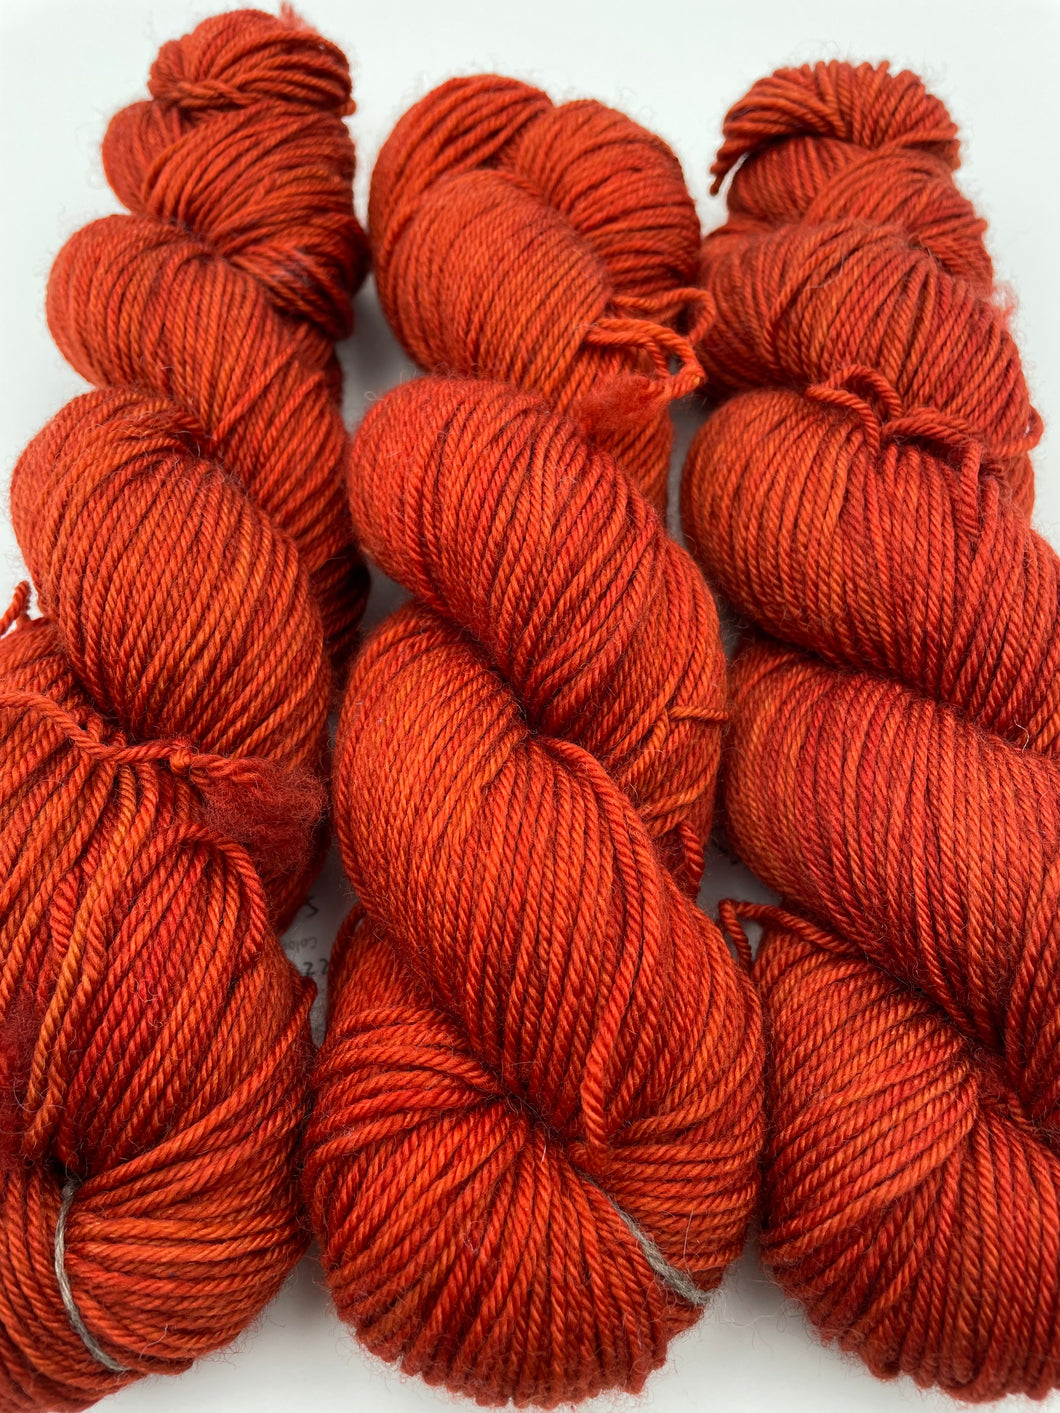 8ply Bluefaced Leicester 'Smoked Paprika'